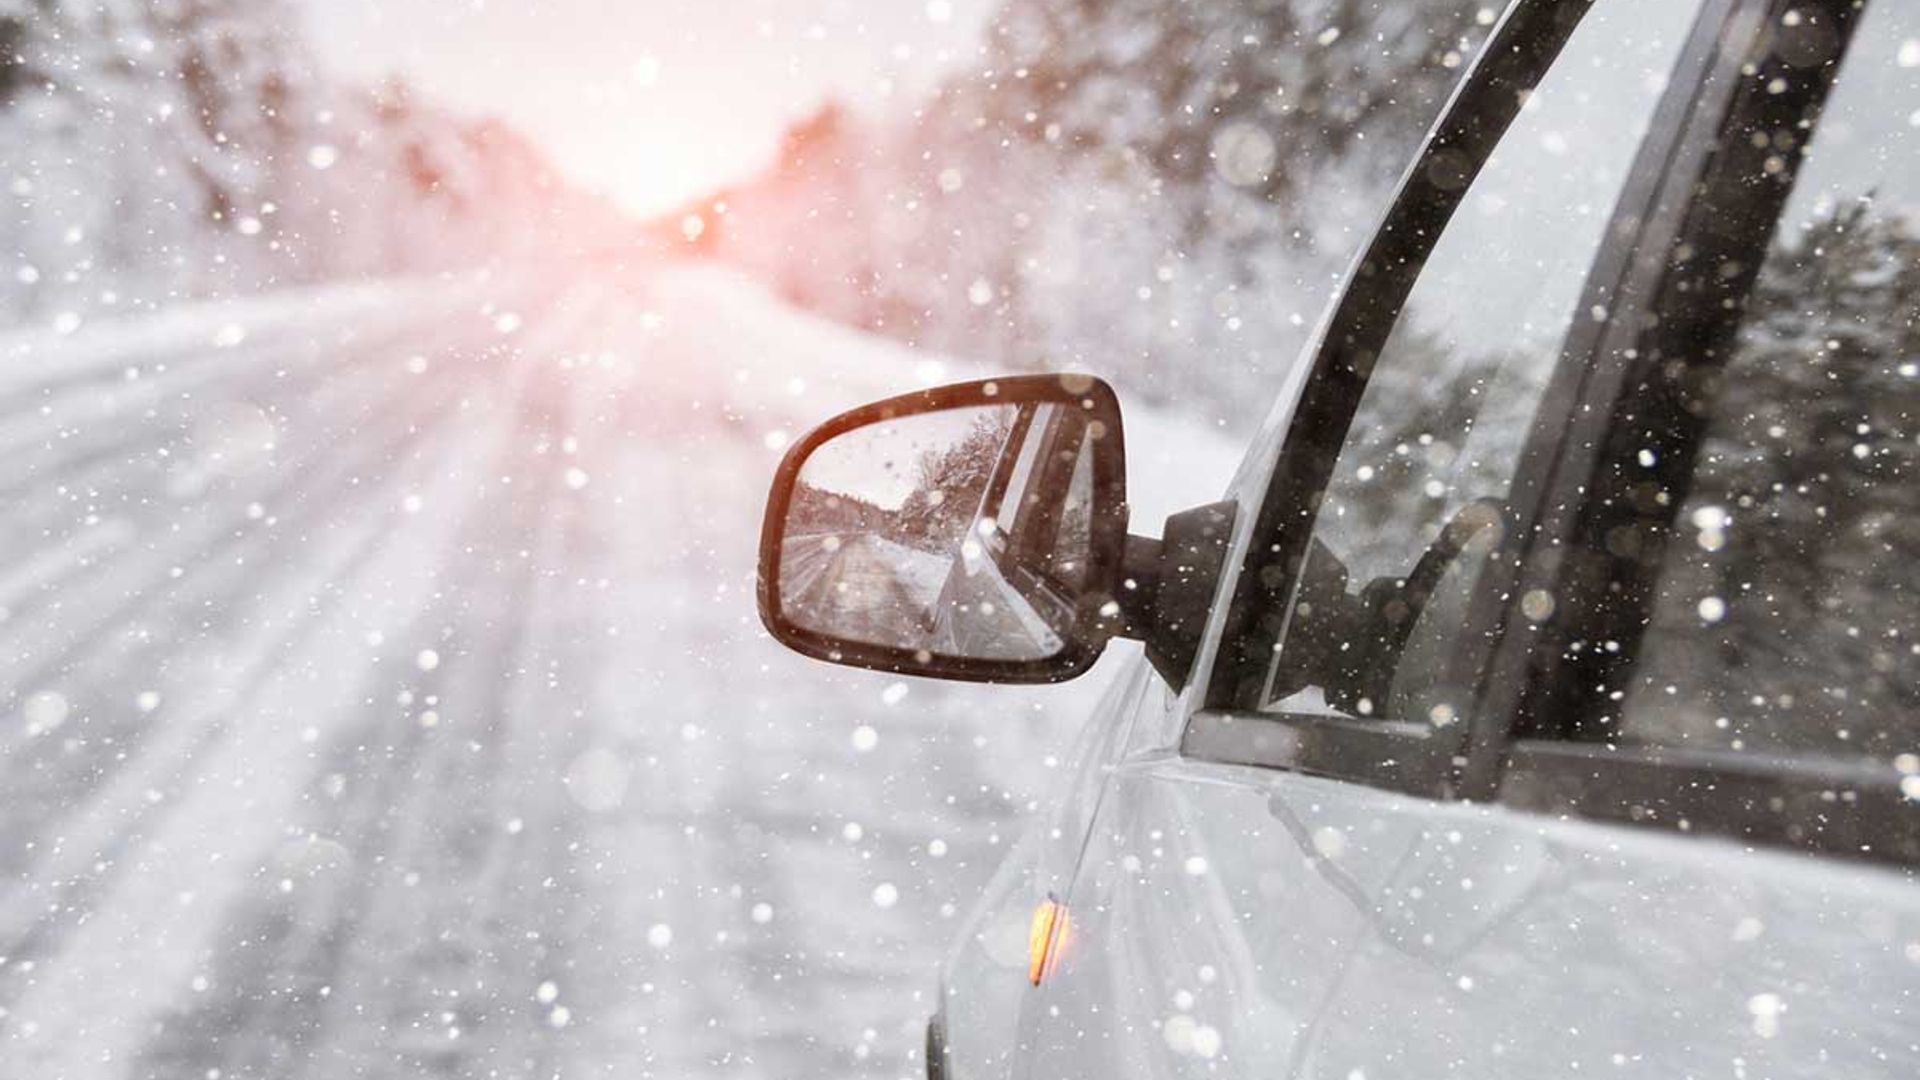 Wintertime climate driving tips: how to drive properly when snow, ice or fog is forecast